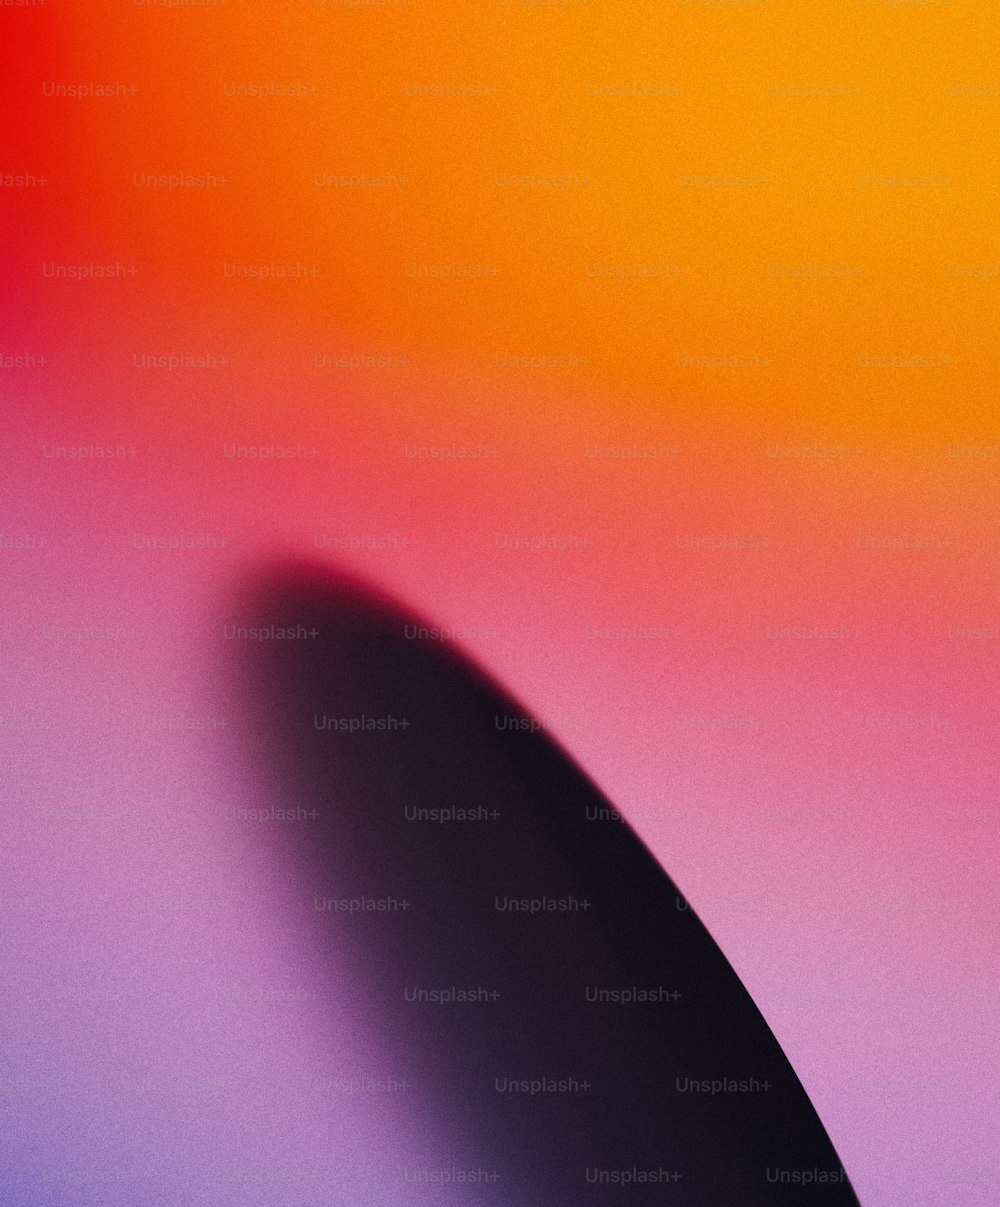 a blurry image of a black object on a colorful background